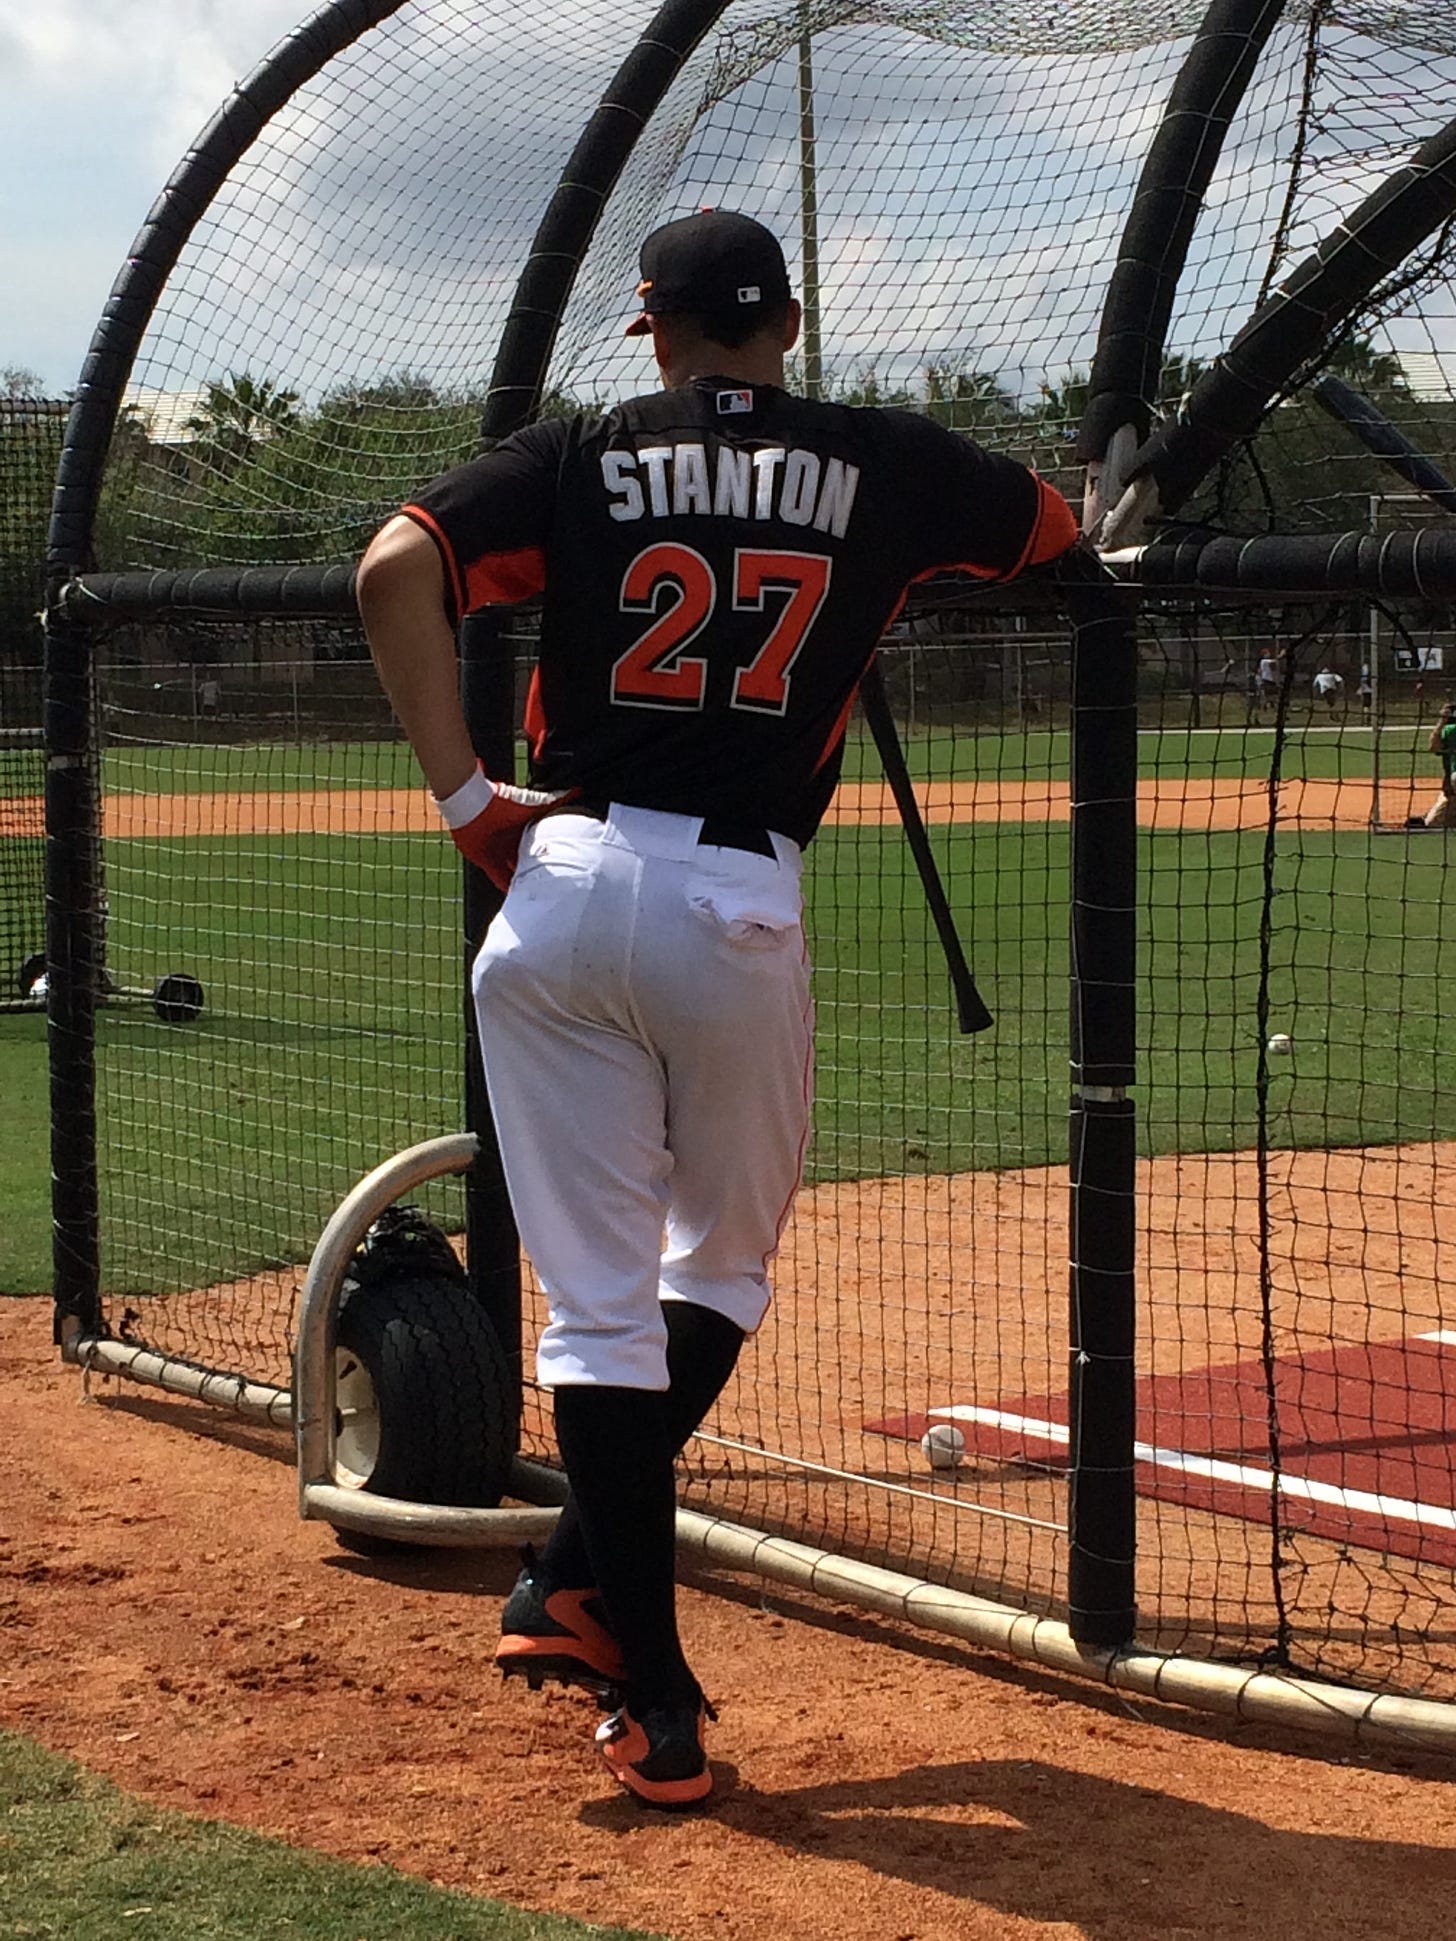 Stanton's back? He is on this fantasy roster.